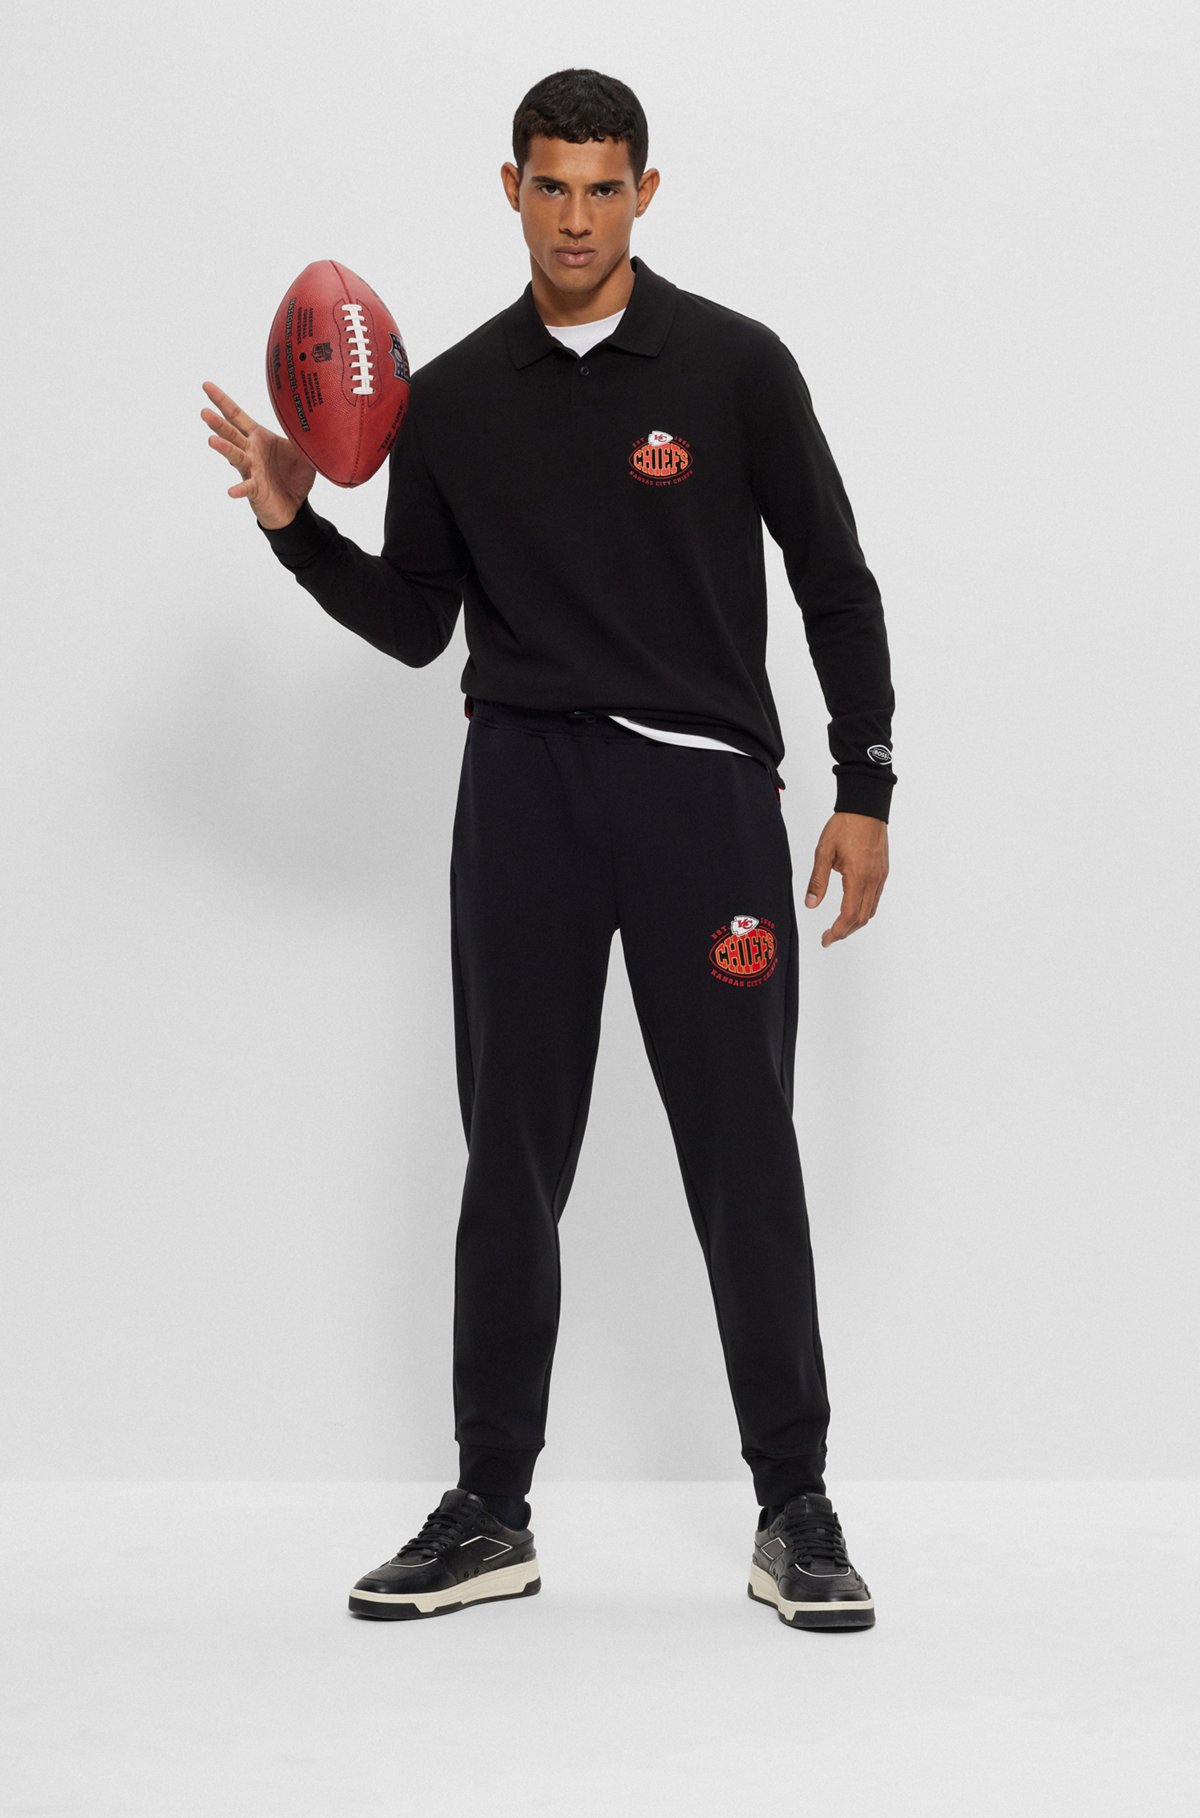 BOSS x NFL long-sleeved polo shirt with collaborative branding, Chiefs